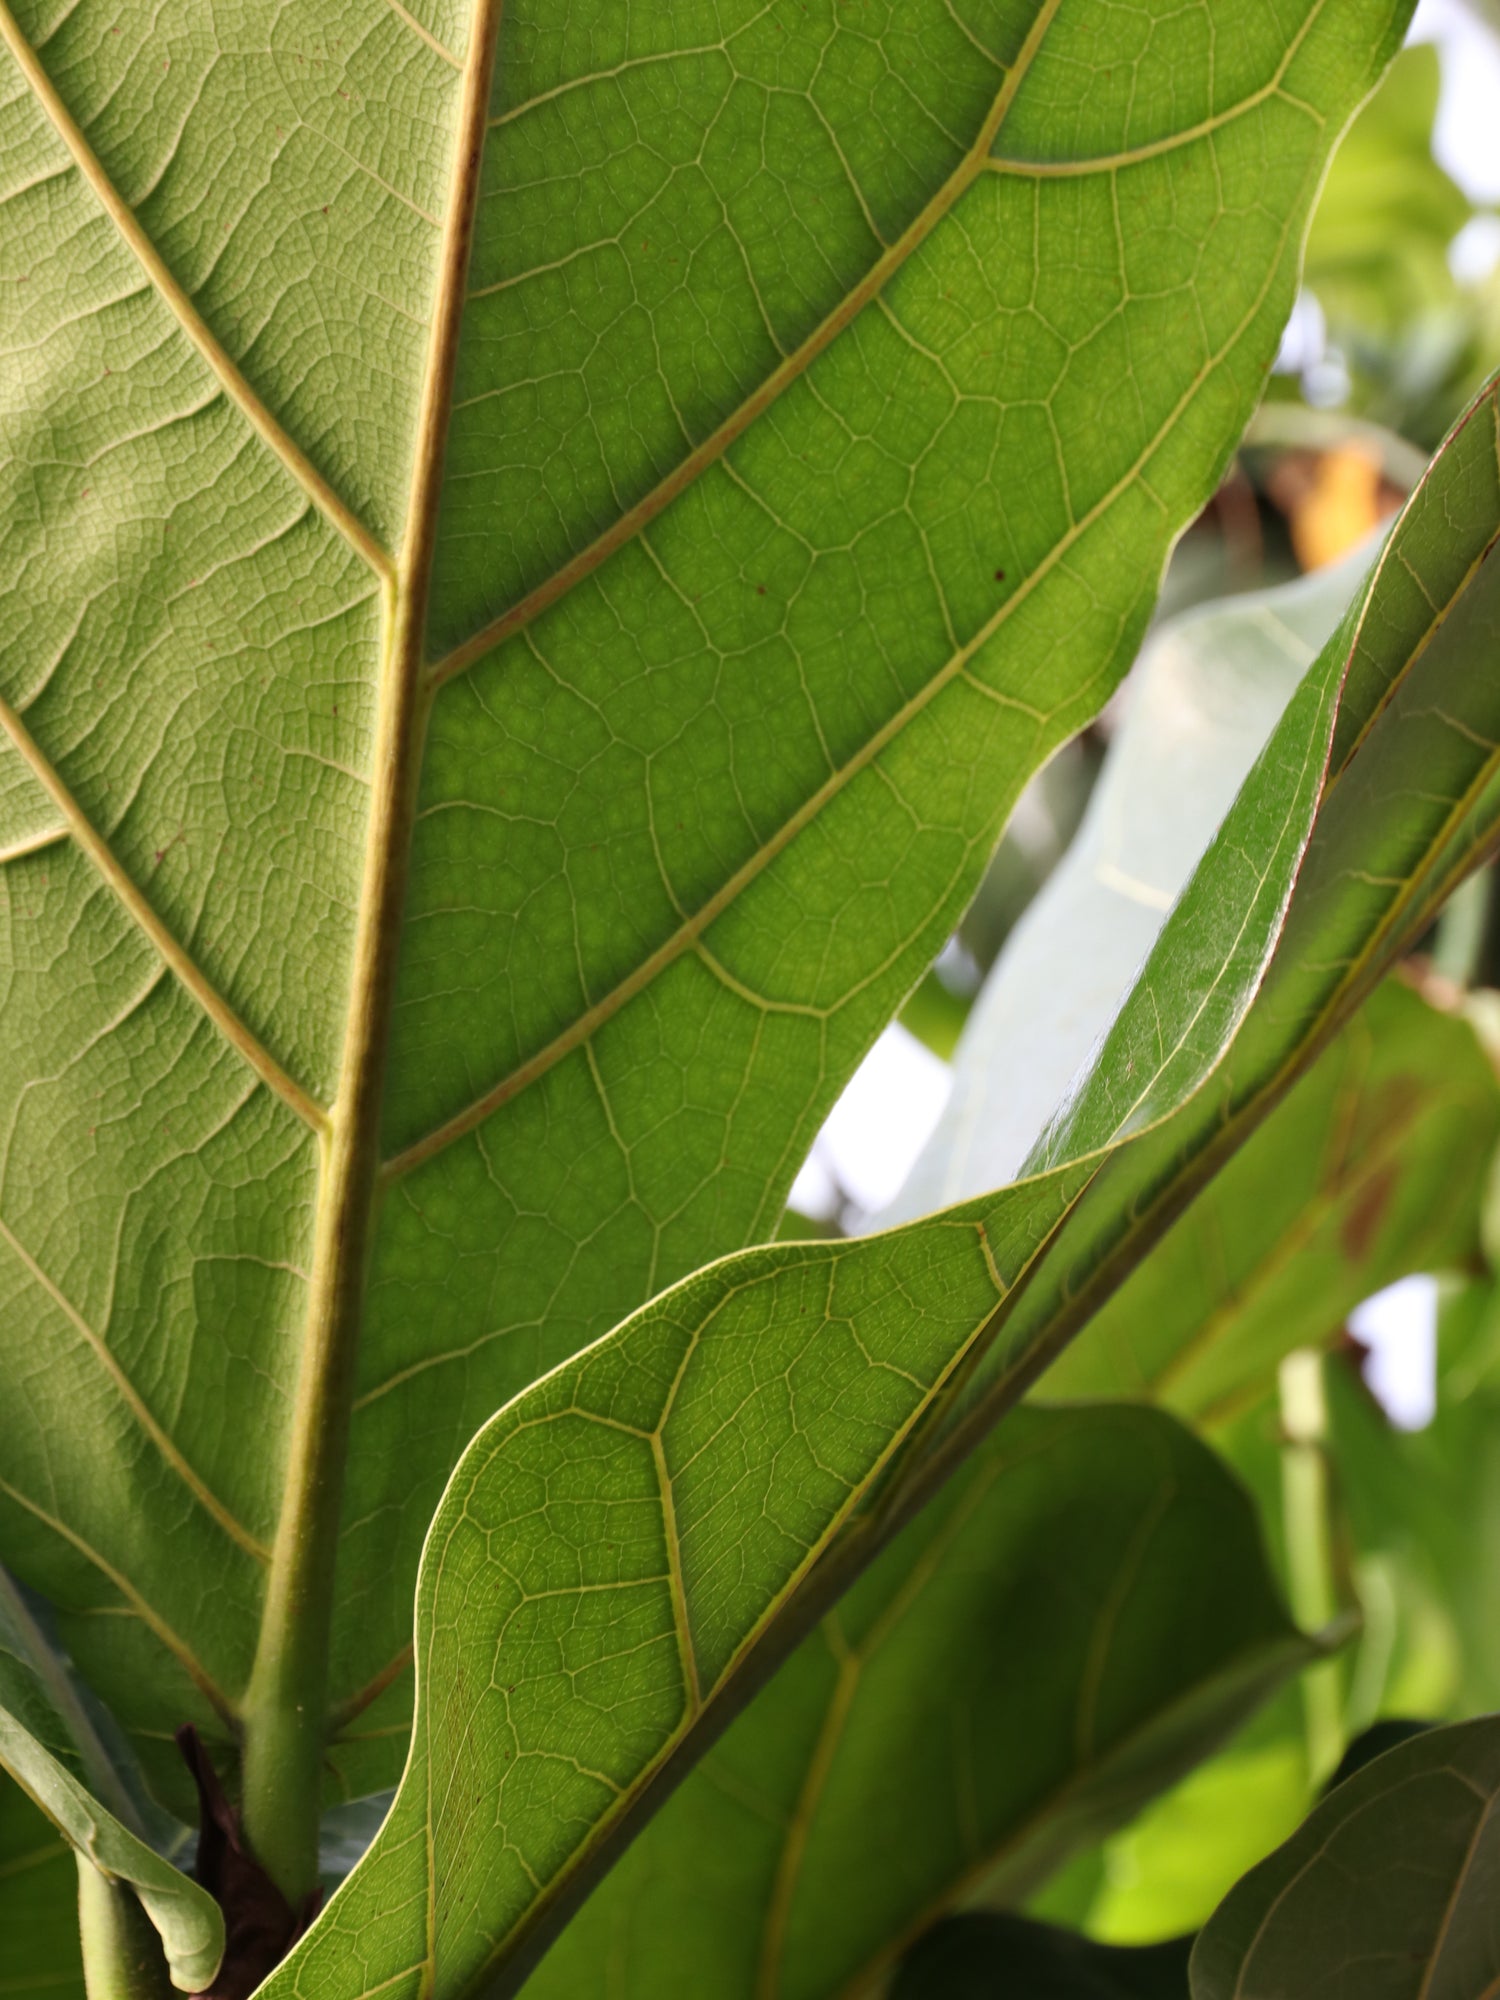 how to care for fiddle leaf figs, fiddle leaf fig care